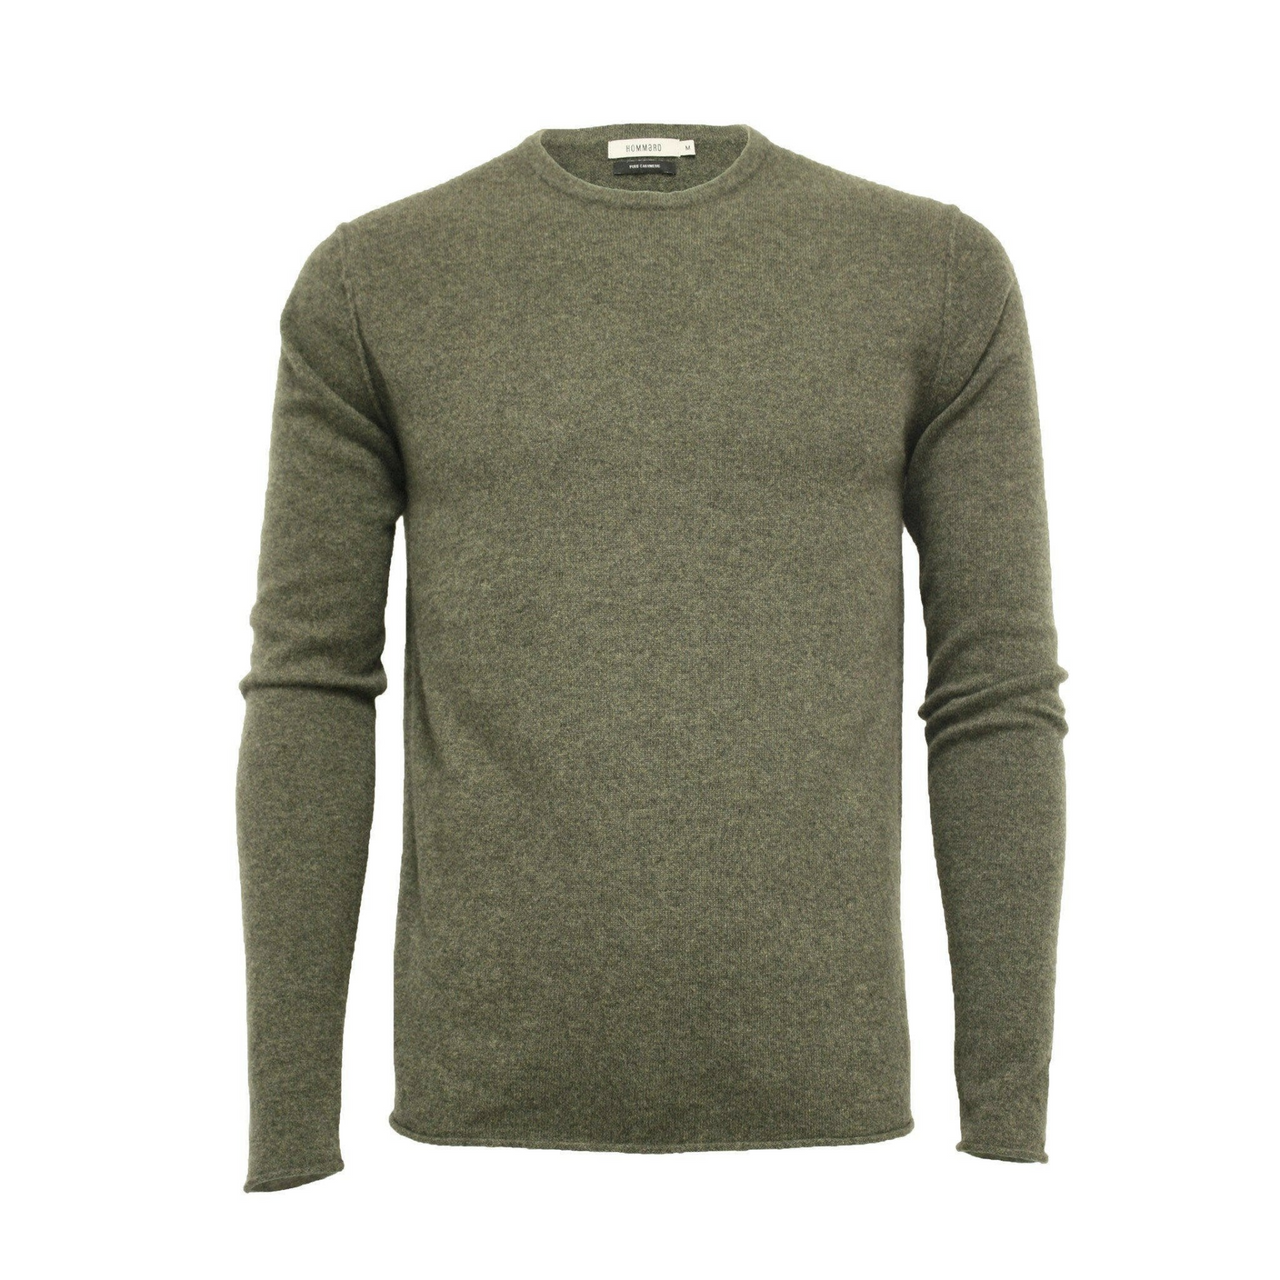 Jeans Cashmere Crew Neck Sweater Ripley